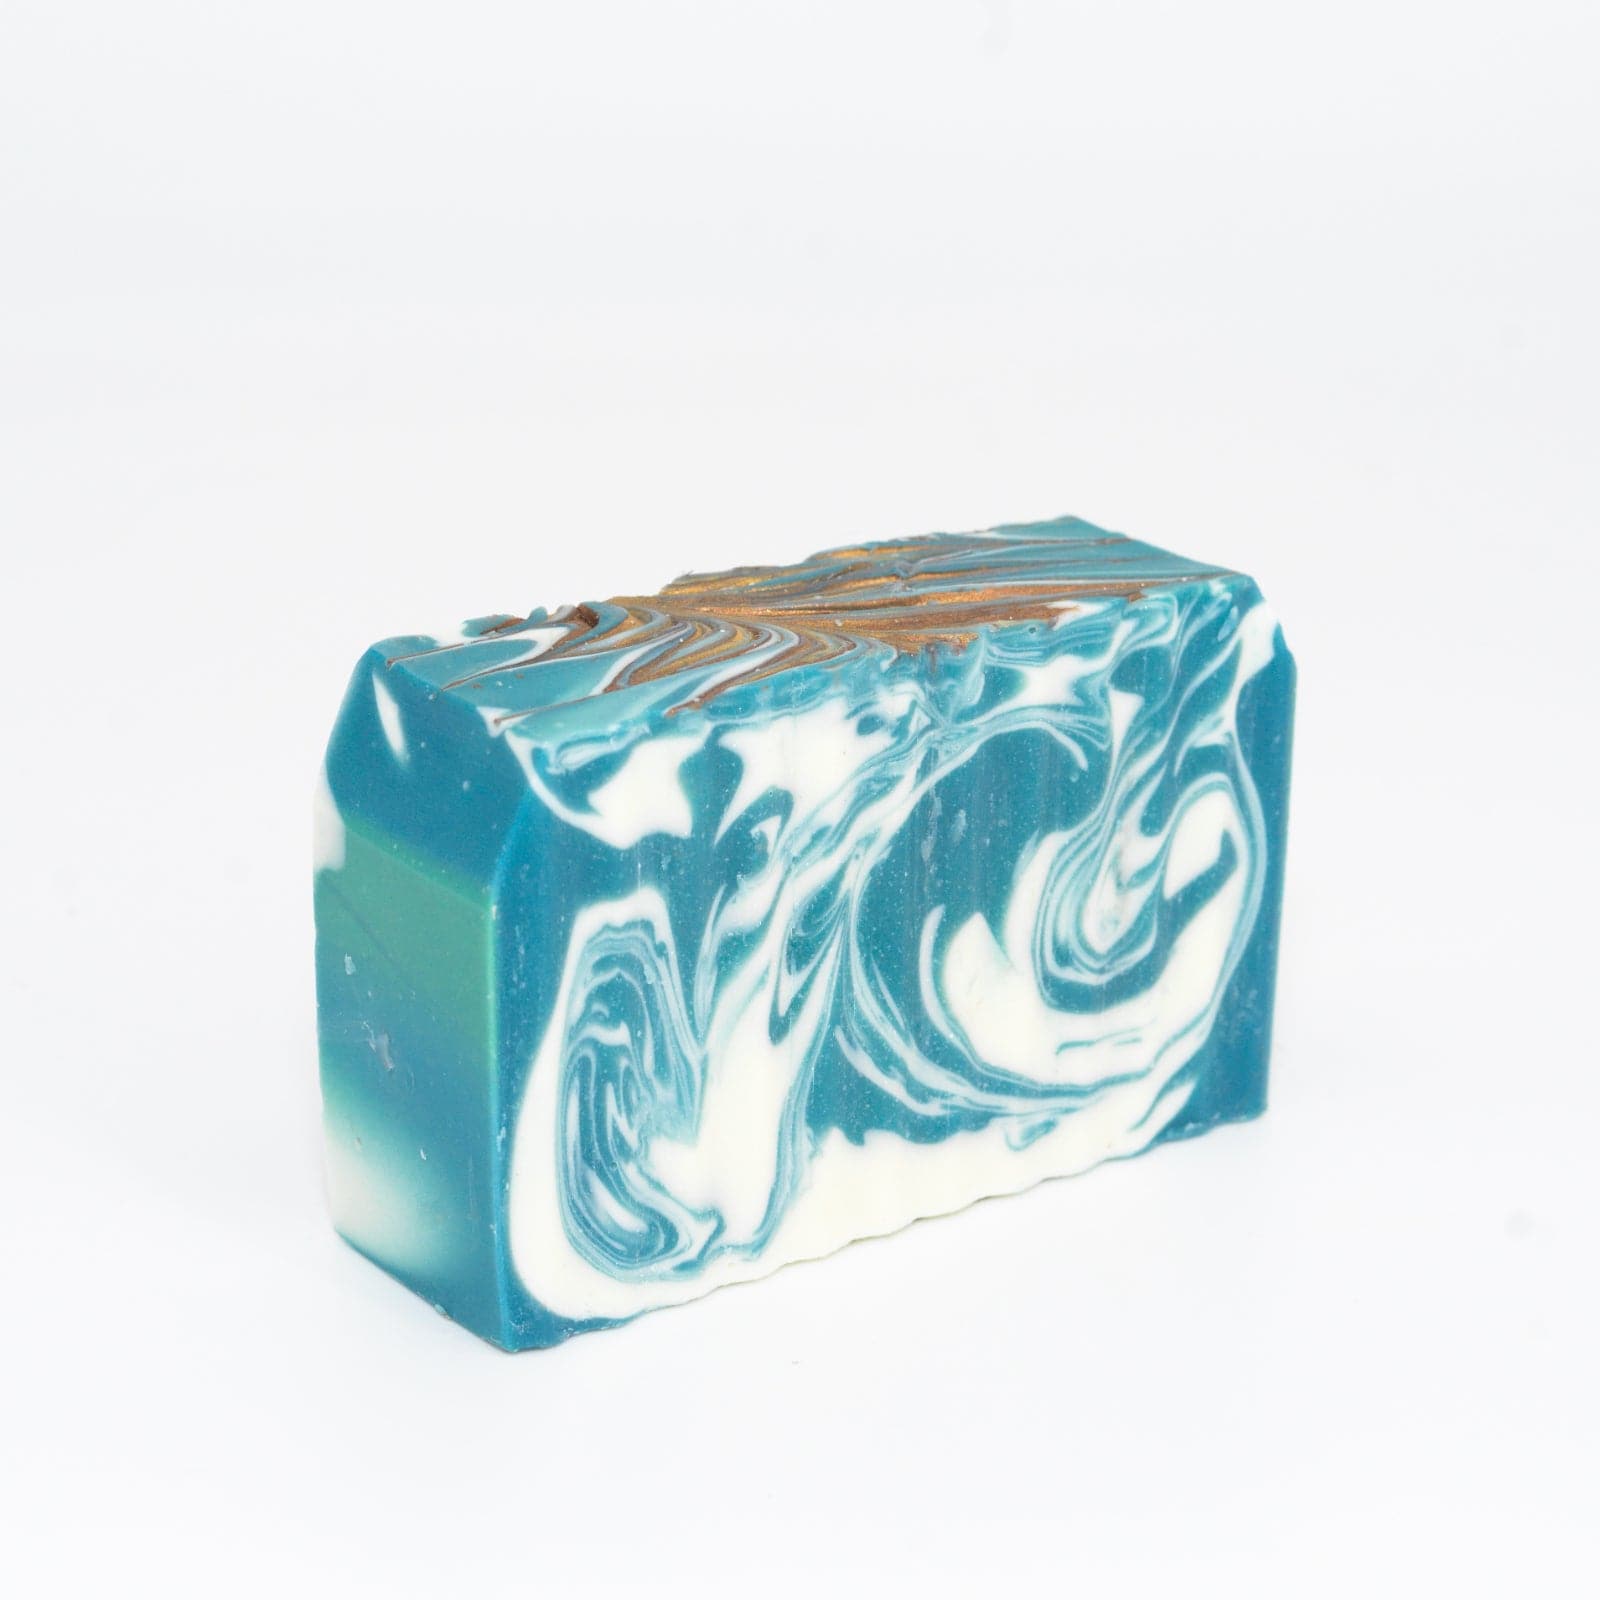 one bar of gold, blue, white and brown soap in the scent Magnolia